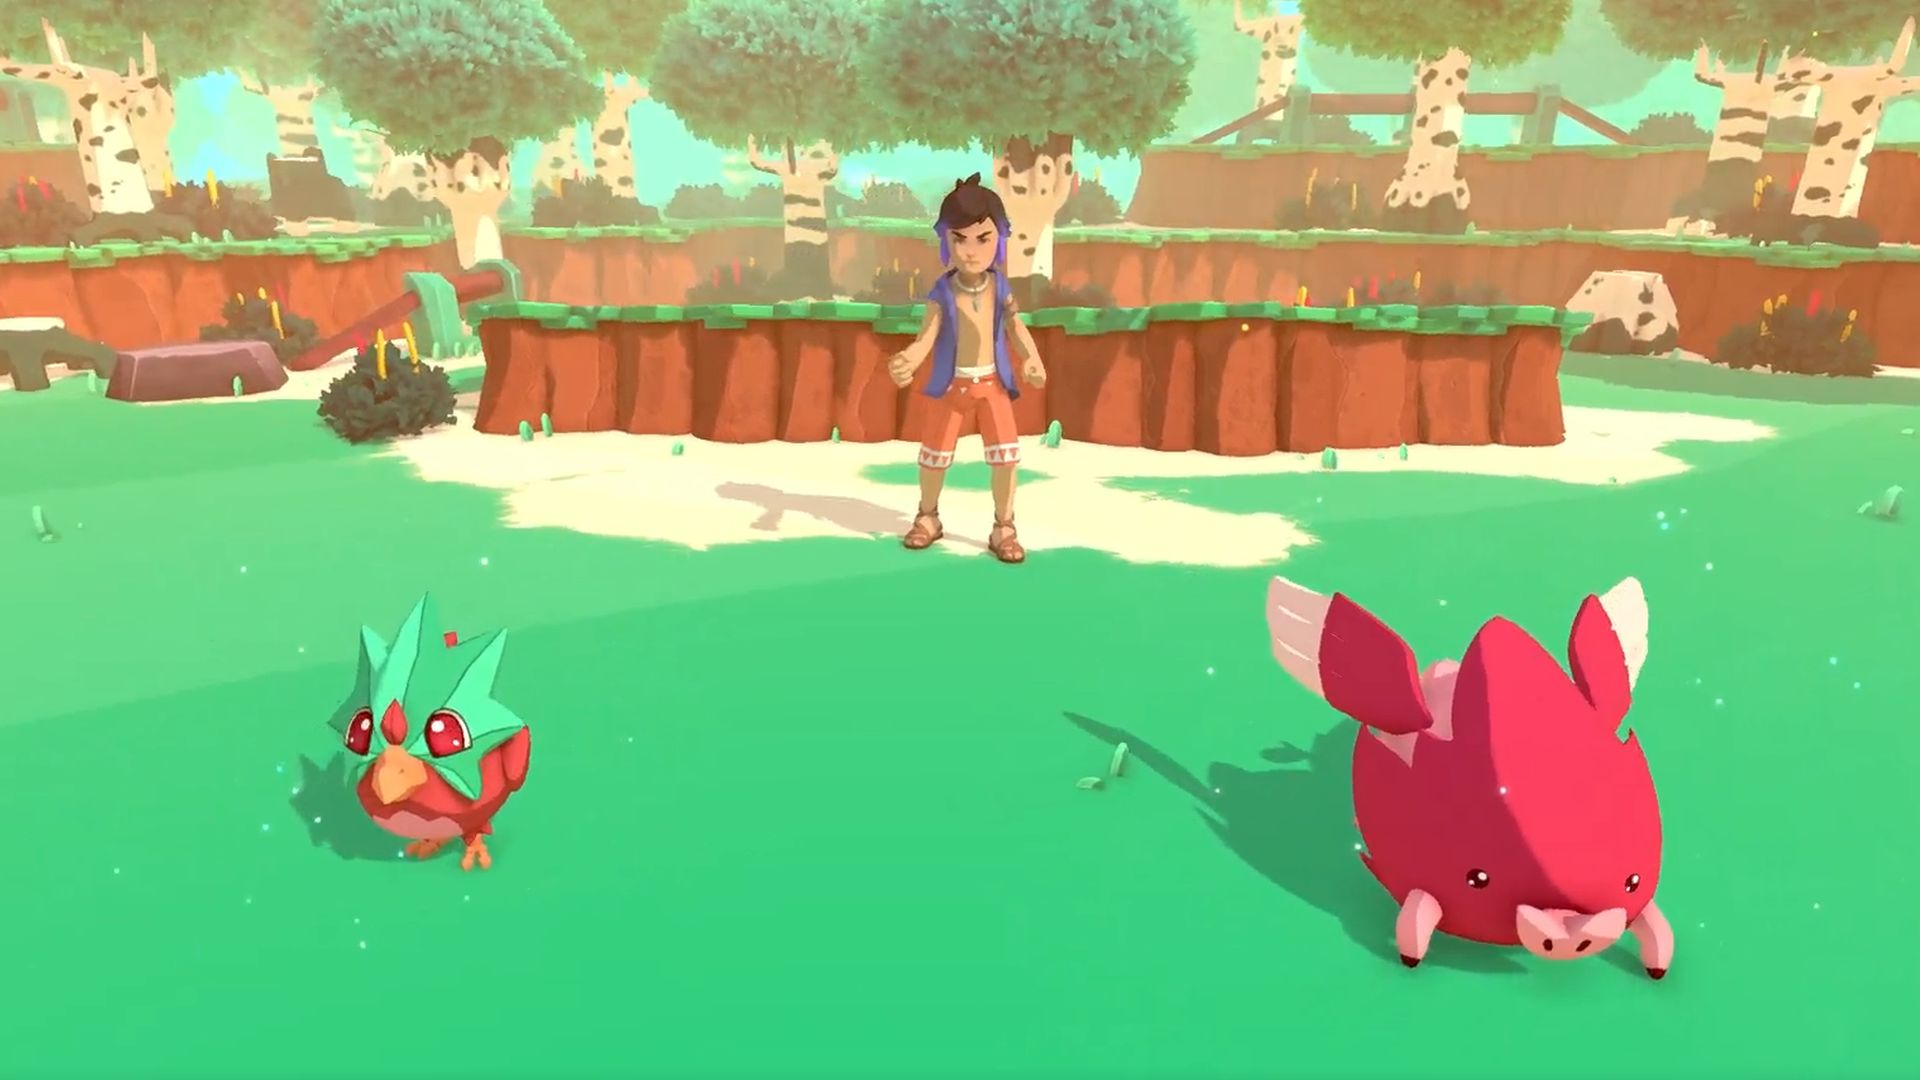 Temtem Stress Test How To Get Early Access To The New Pokemon